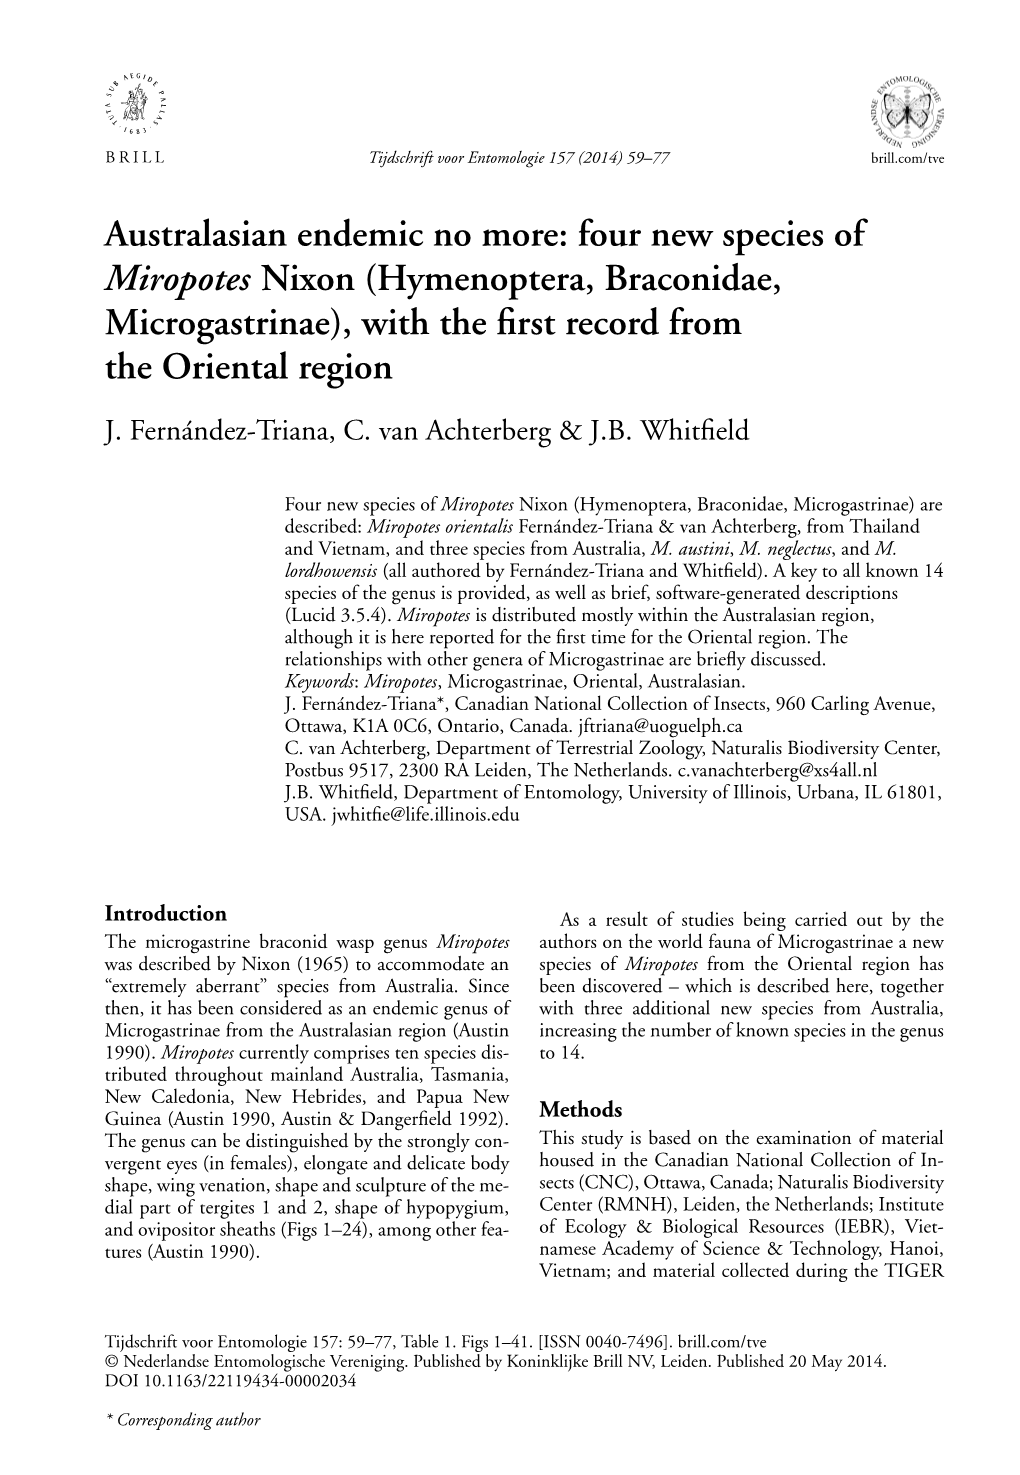 Australasian Endemic No More: Four New Species of Miropotes Nixon (Hymenoptera, Braconidae, Microgastrinae), with the ﬁrst Record from the Oriental Region J